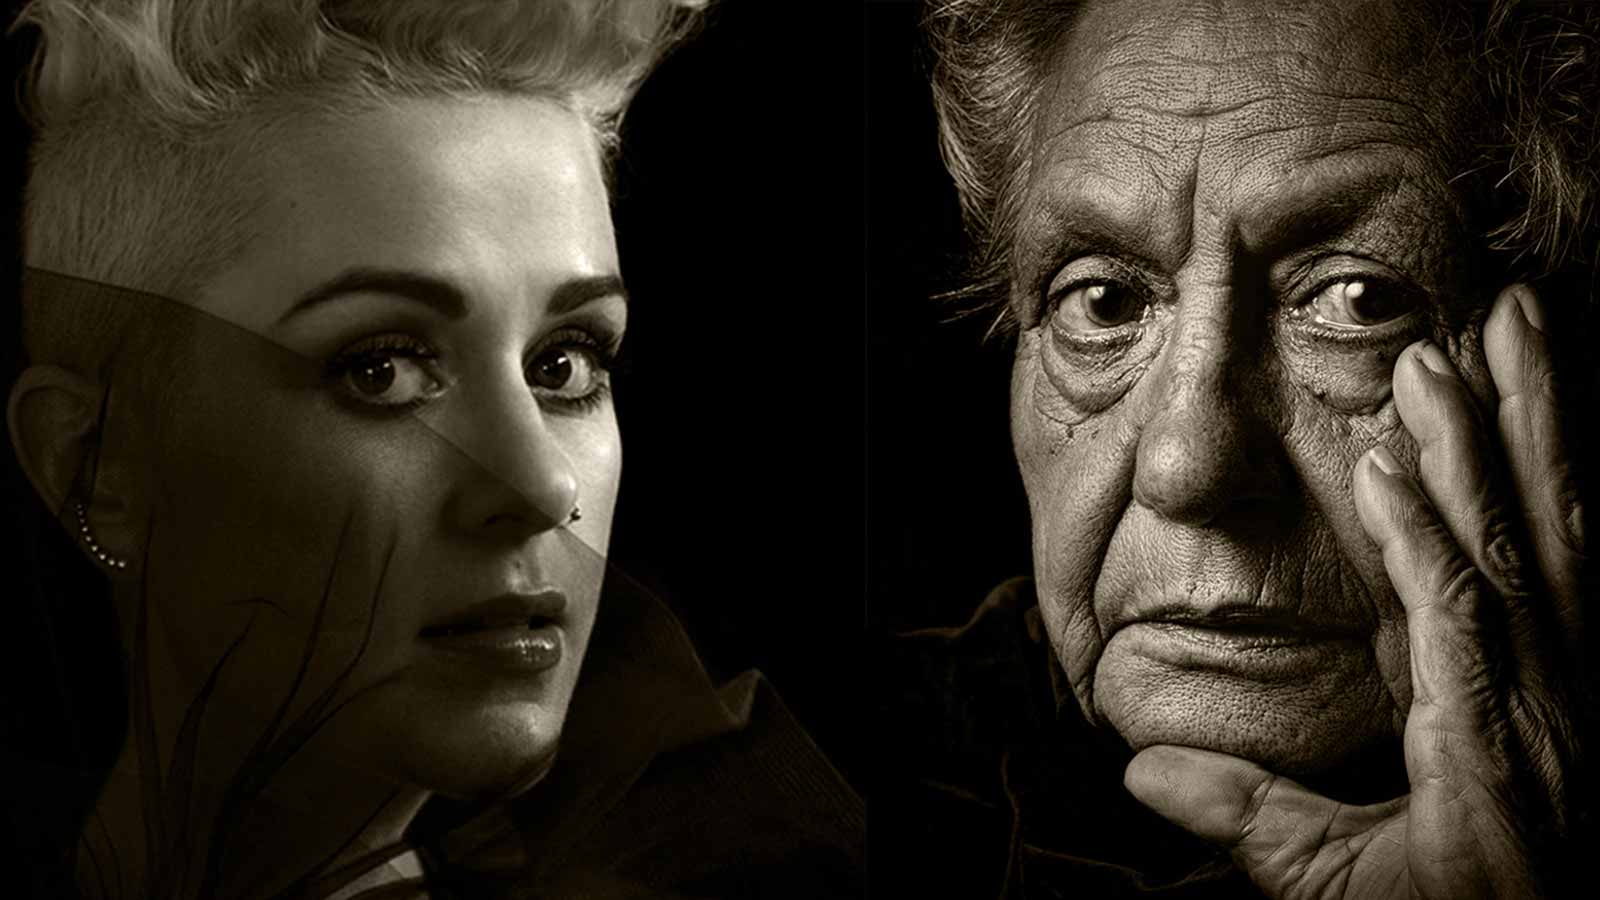 A woman with short blonde hair next to a man with a wrinkled appearance hand resting on his face.